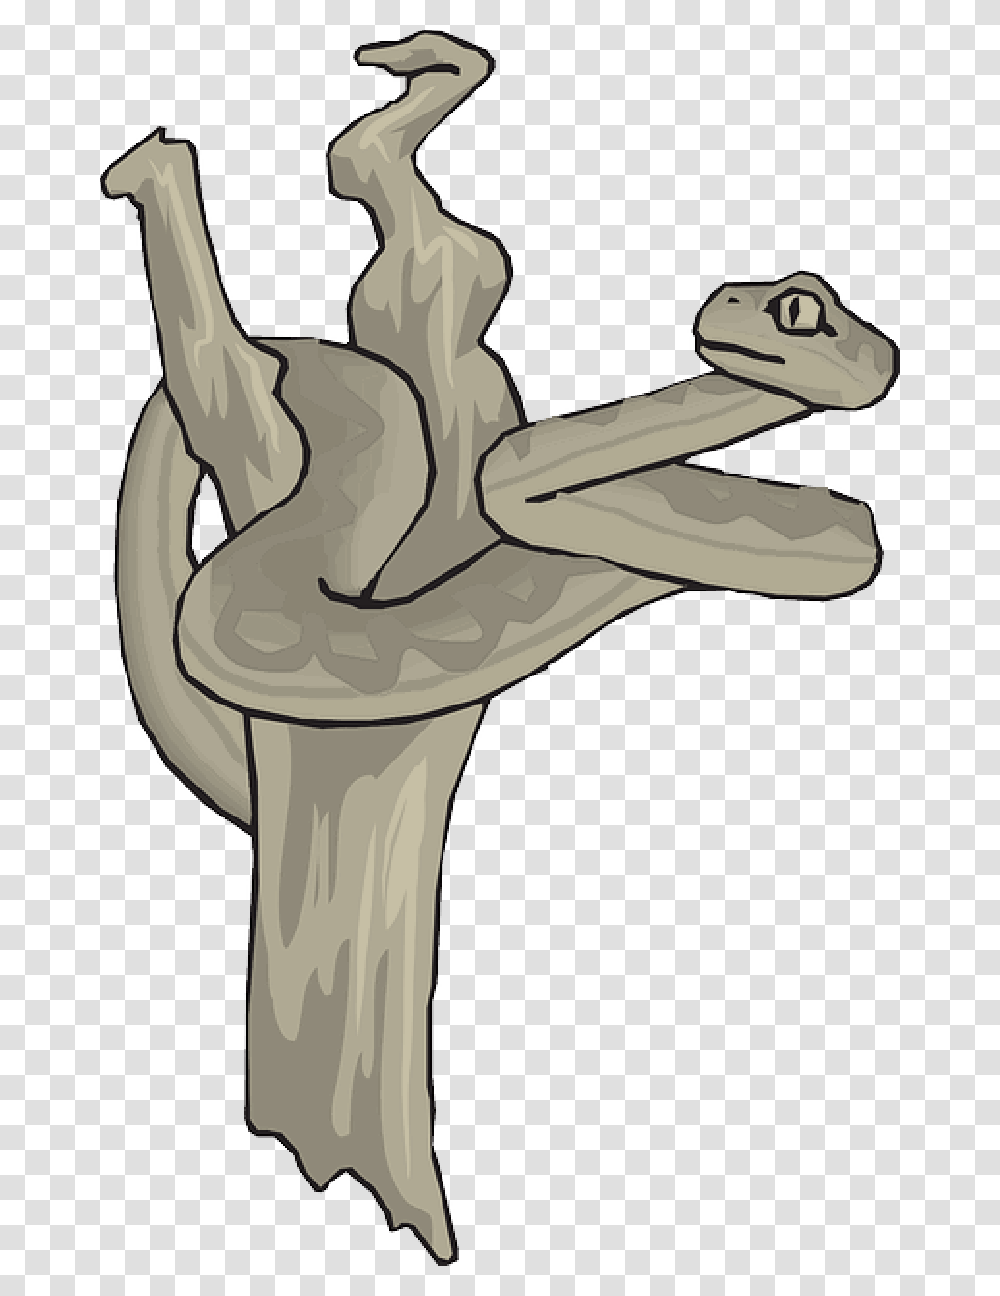 Snake Dead Tree Branch Reptile Curled Snake Transparent Png